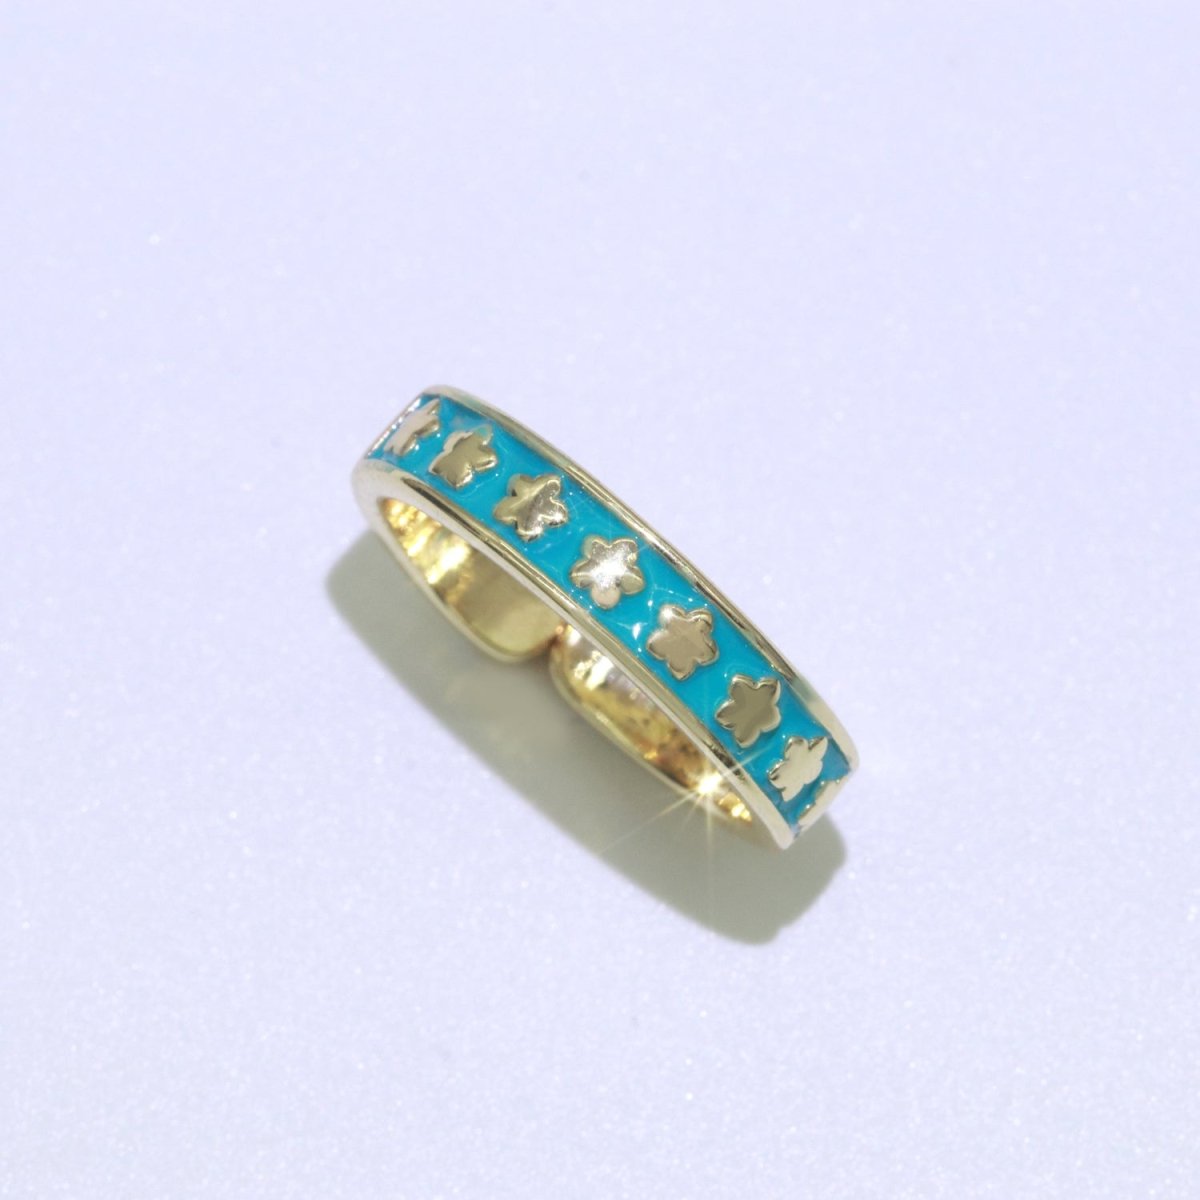 1x Dainty Colorful Enamel Ring Multicolor Enamel Band Star Ring Stacking Open Ring Adjustable Ring Yellow Teal Pink Green White Neon Ring O-387 ~ O-394 - DLUXCA